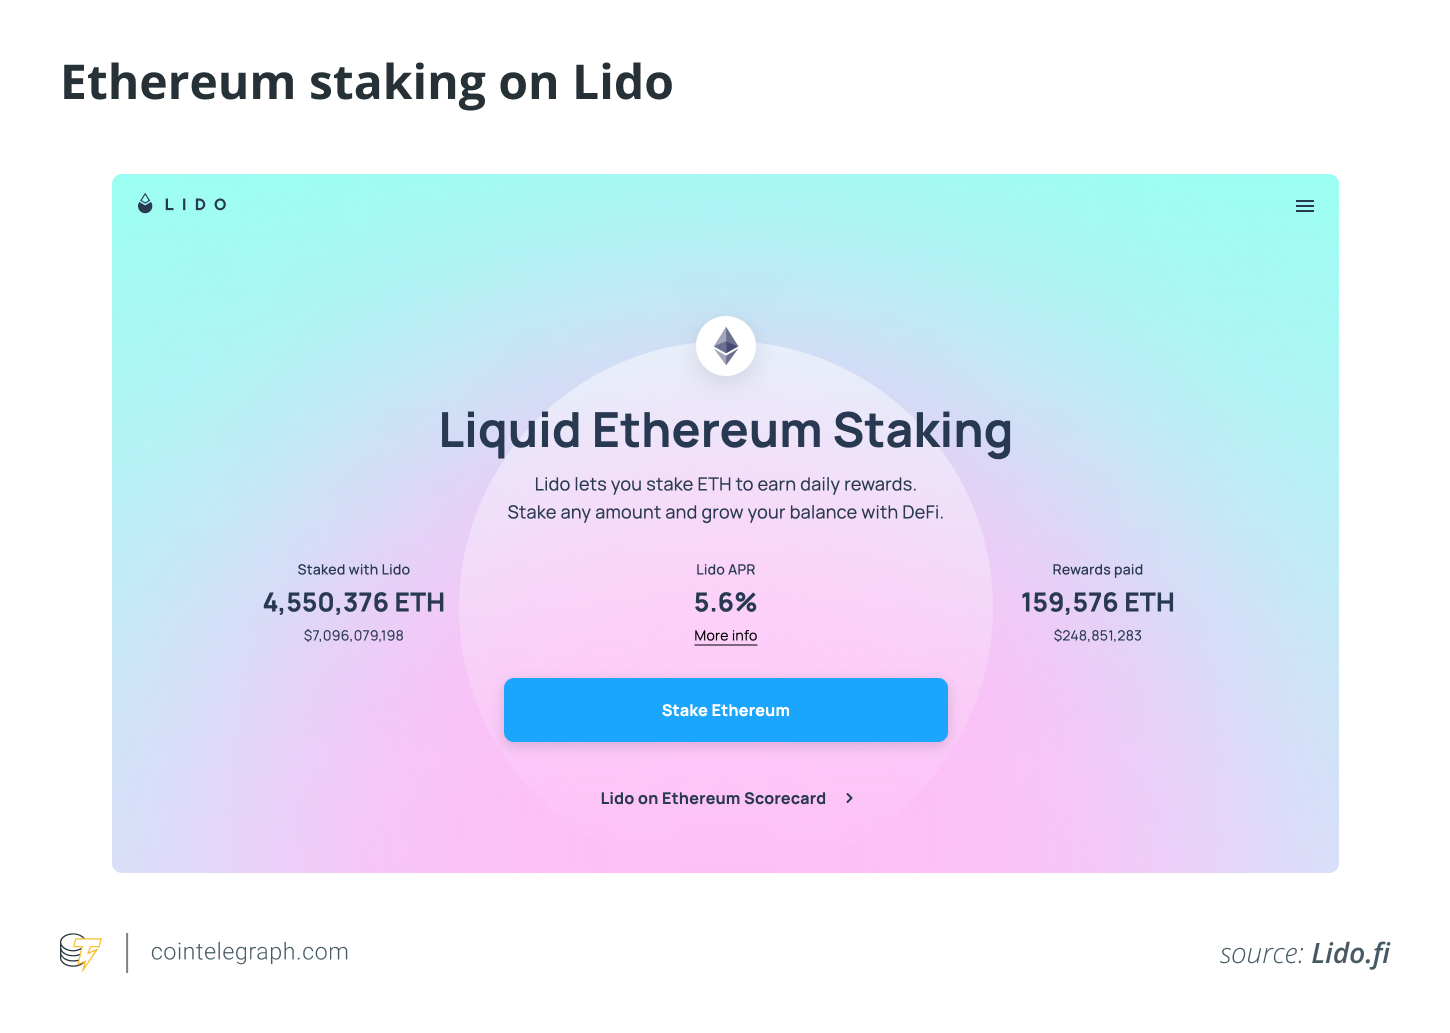 Ethereum staking on Lido